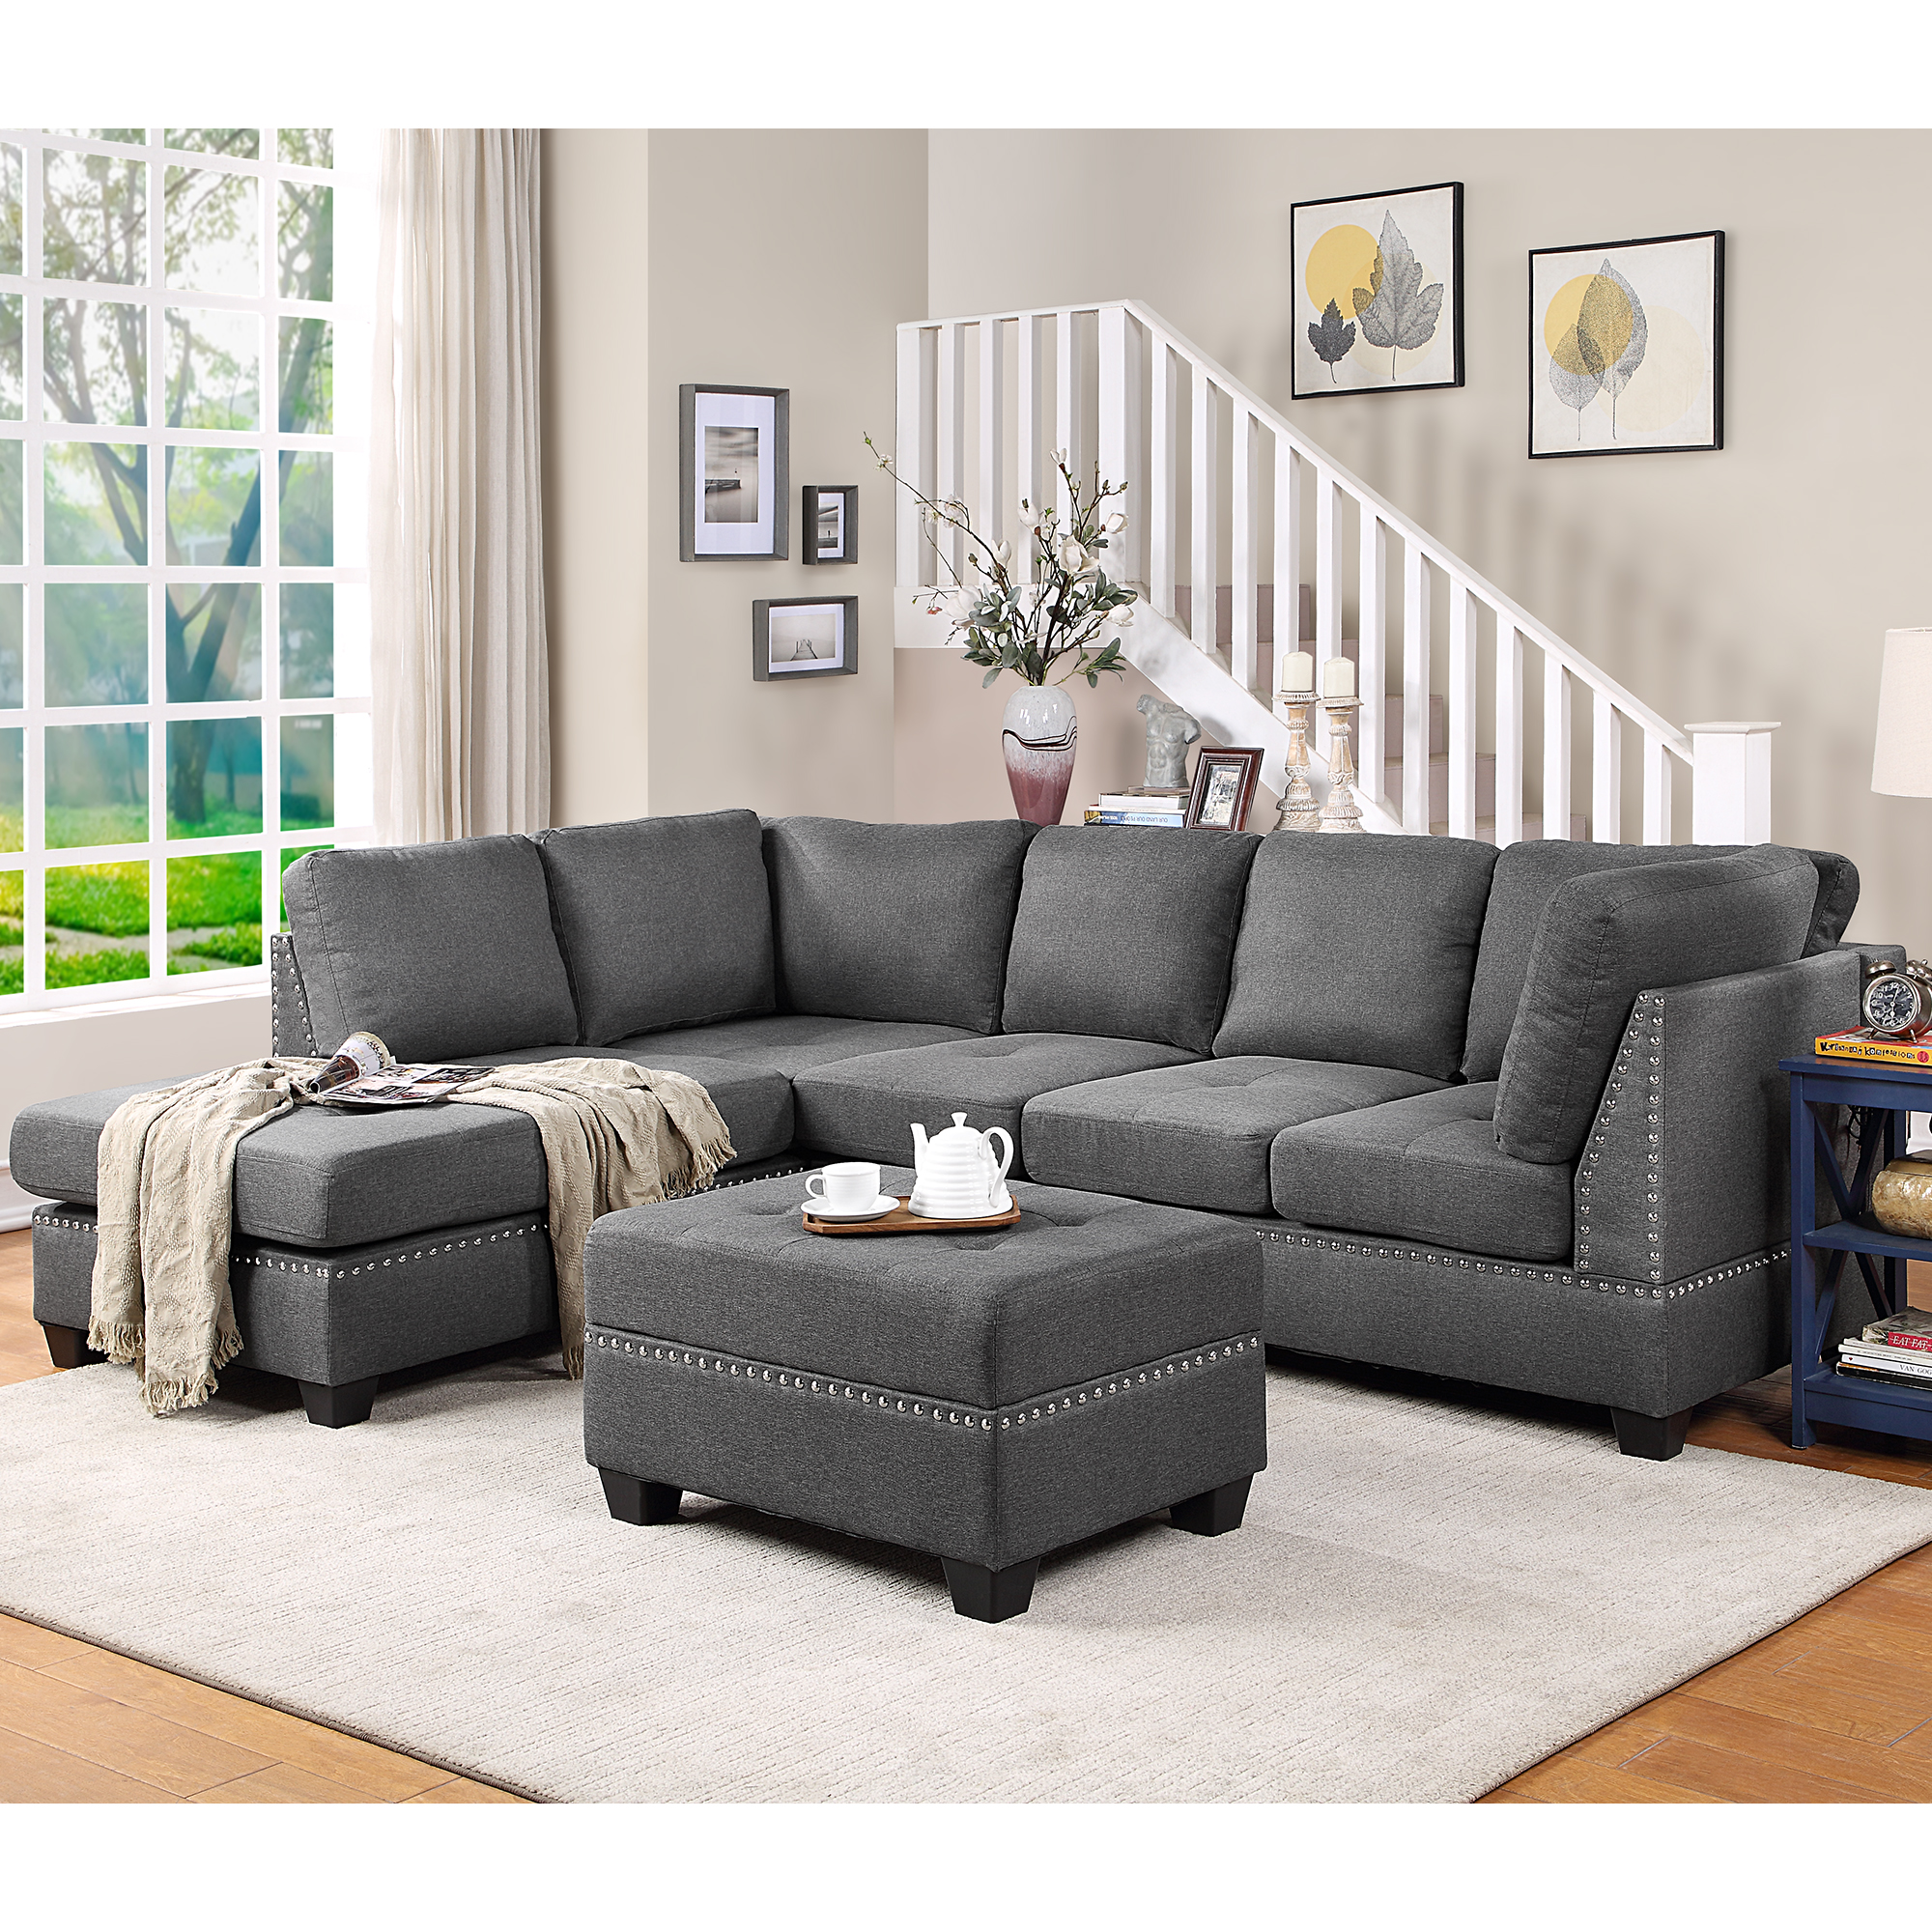 Reversible Sectional Sofa Space Saving with Storage - SG000405AAA